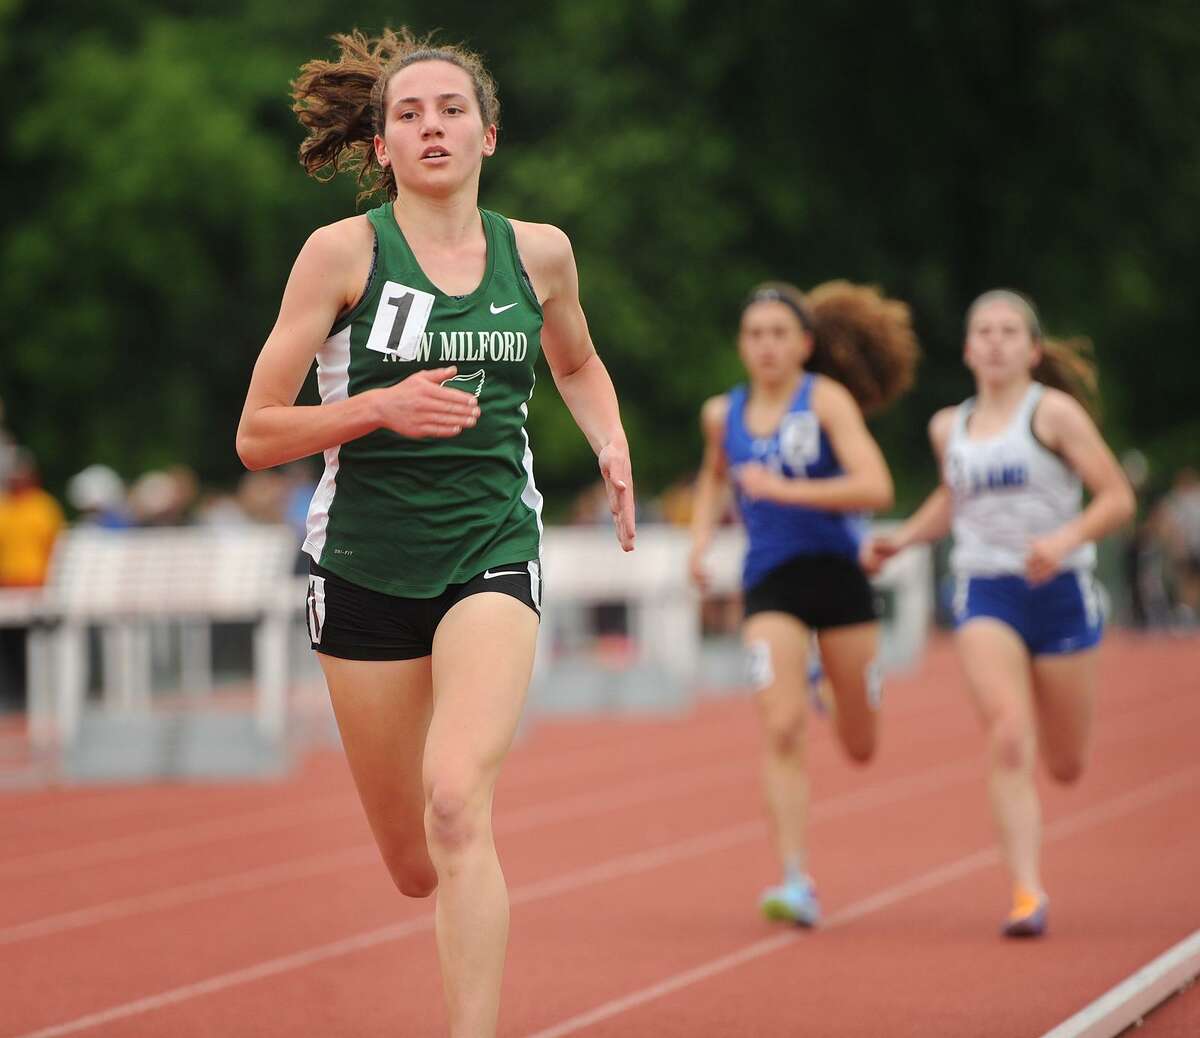 FILE PHOTO: New Milford's Mia Nahom runs to an easy victory in the girls 1600 meters at the State Open Outdoor Track championships at Willow Brook Park in New Britain, Conn. on Monday, June 5, 2017.